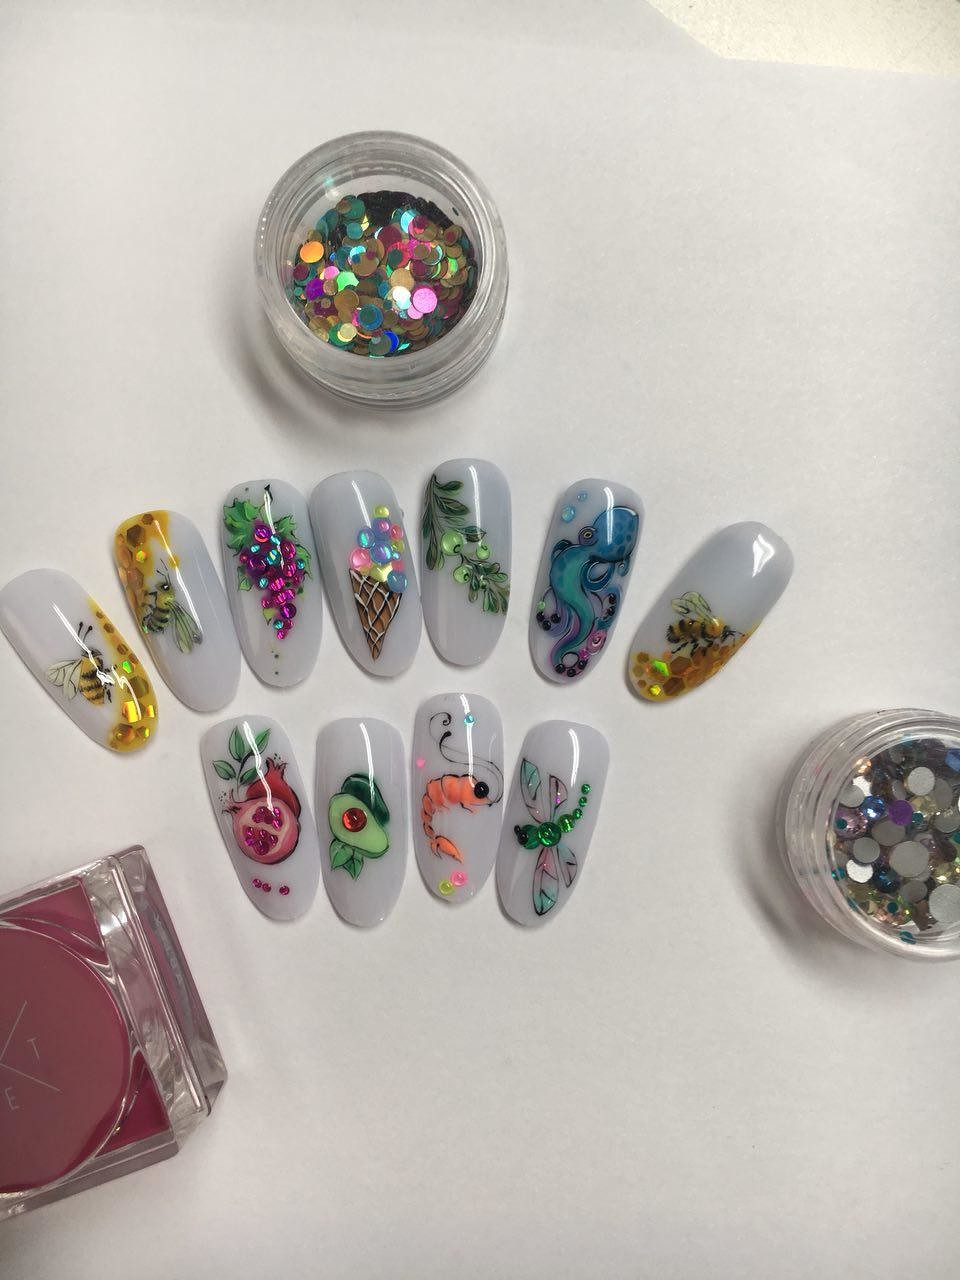 Free Manicure And Nail Art Course Kings Lynn